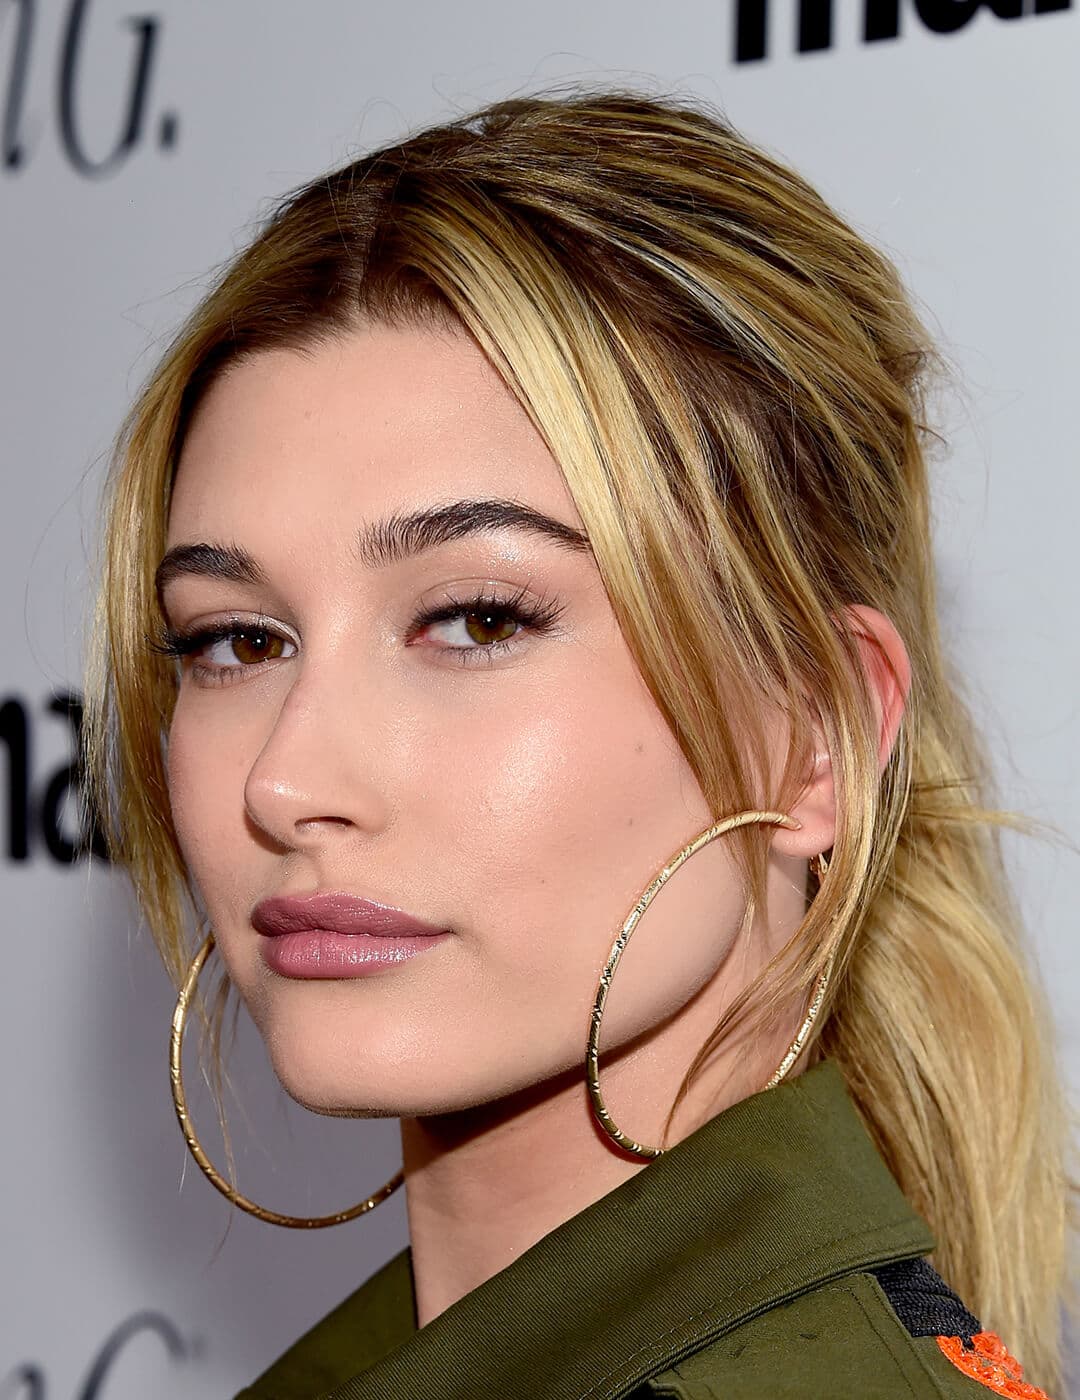 Close-up image of Hailey Bieber rocking an olive green jacket, large hoop earrings, and ponytail hairstyle with curtain bangs